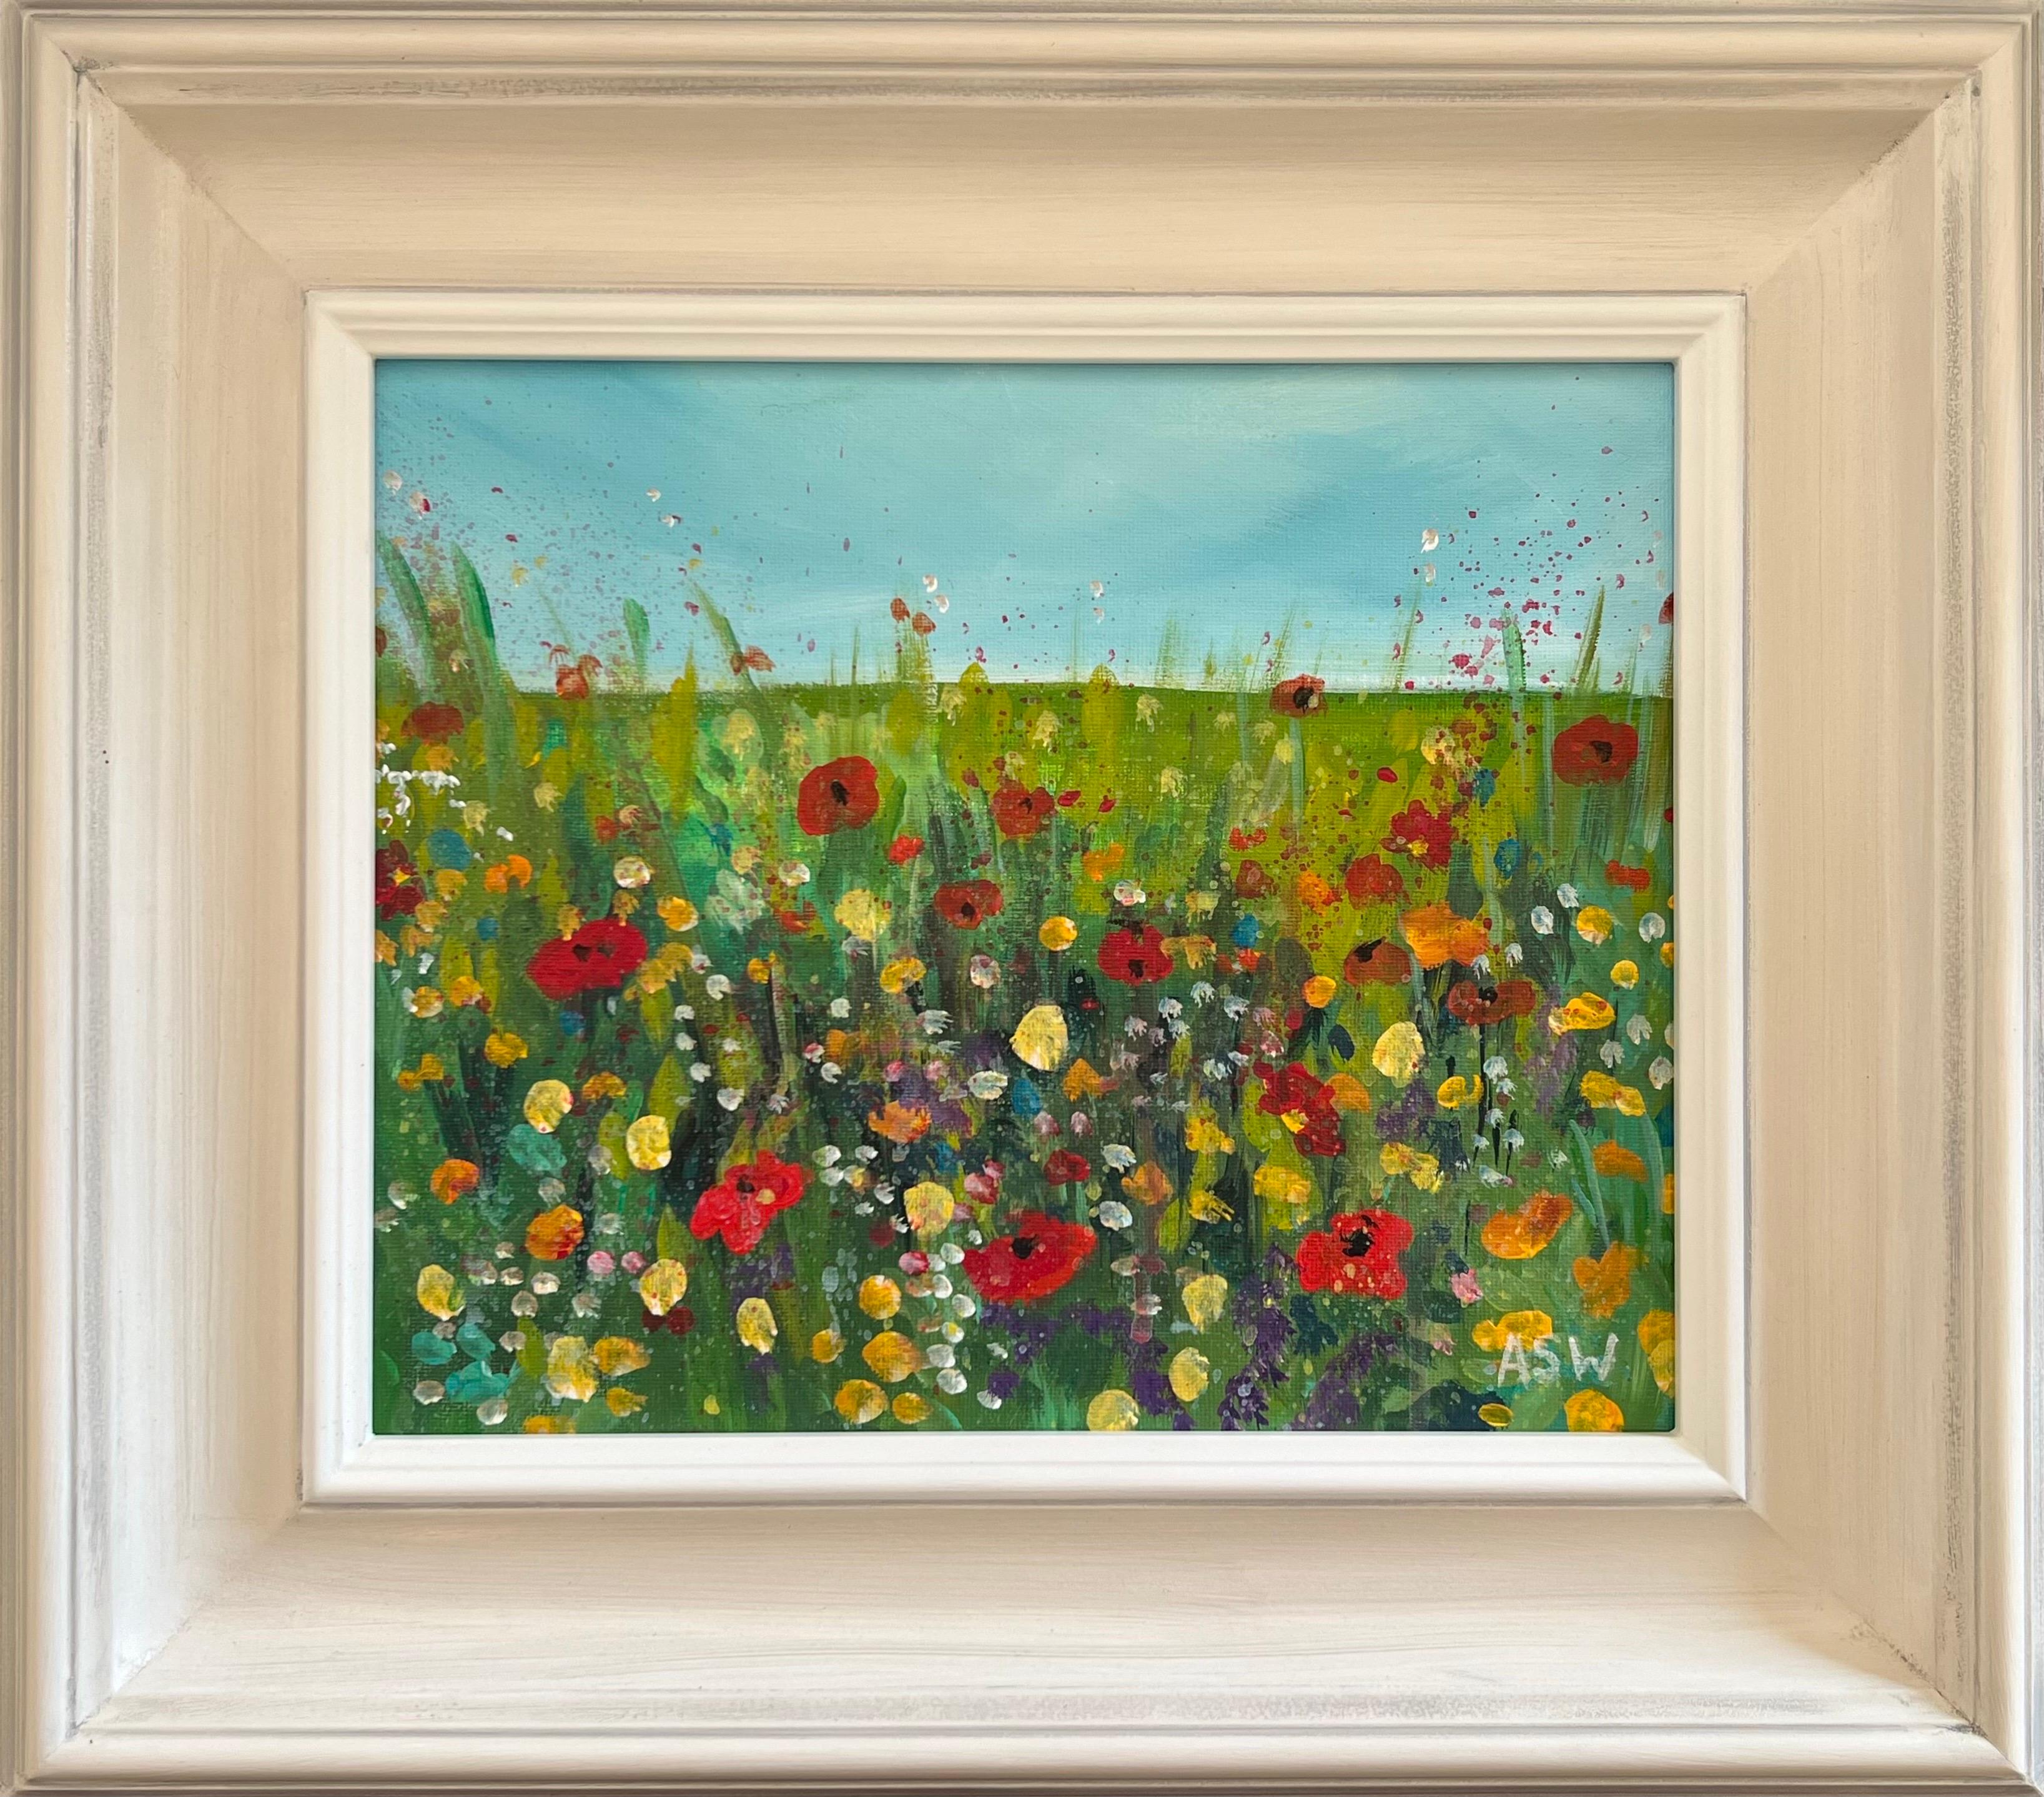 Colourful Wild Red & Yellow Flowers in a Meadow Landscape by Contemporary Artist